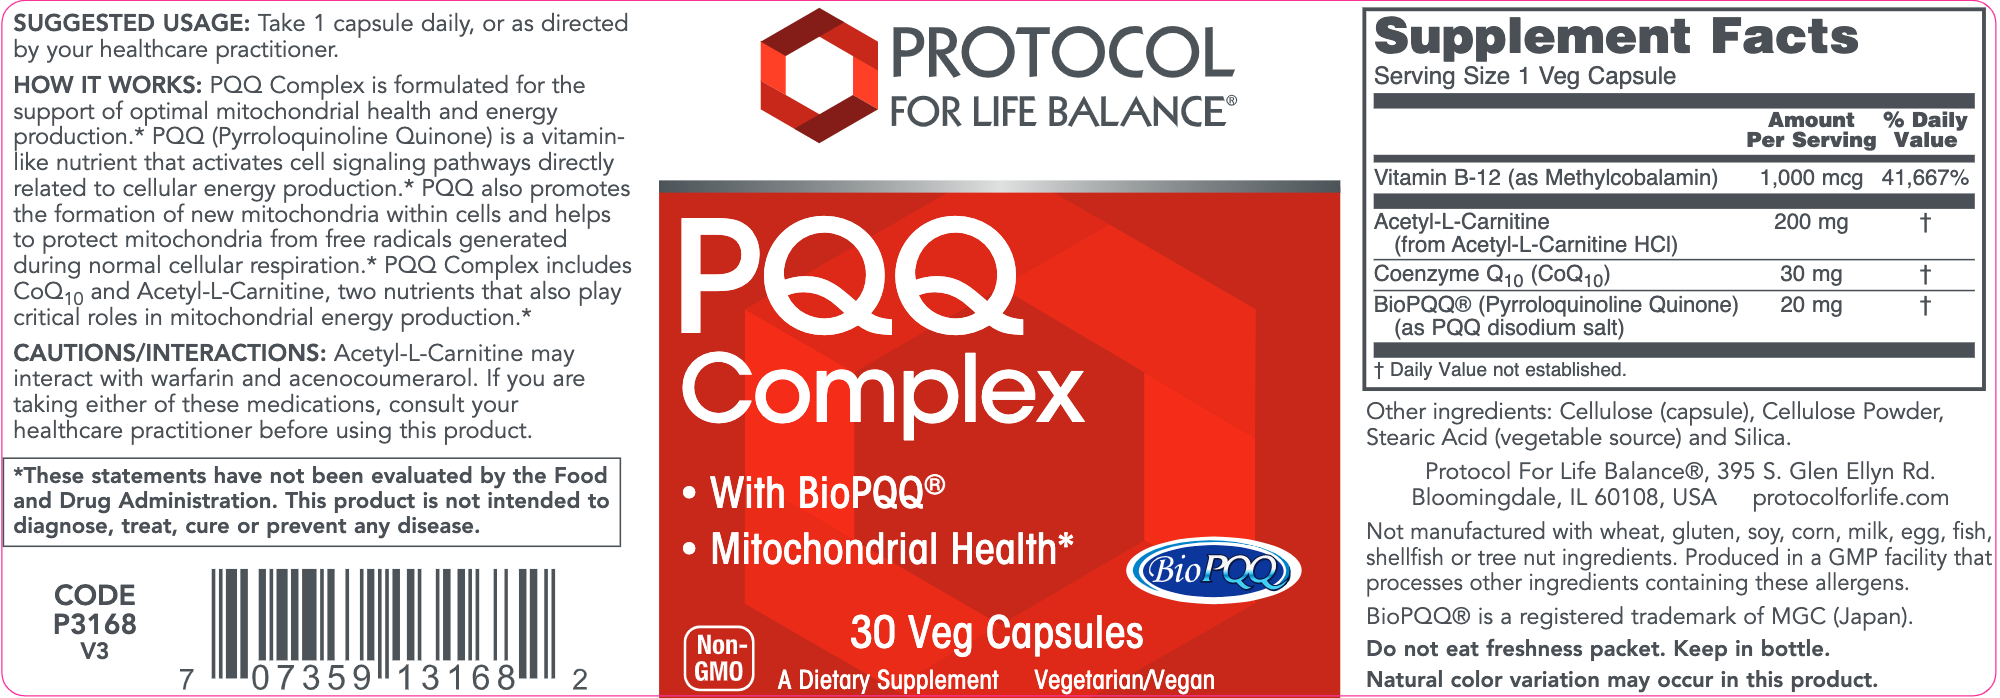 PQQ Complex (30 Capsules)-Vitamins & Supplements-Protocol For Life Balance-Pine Street Clinic